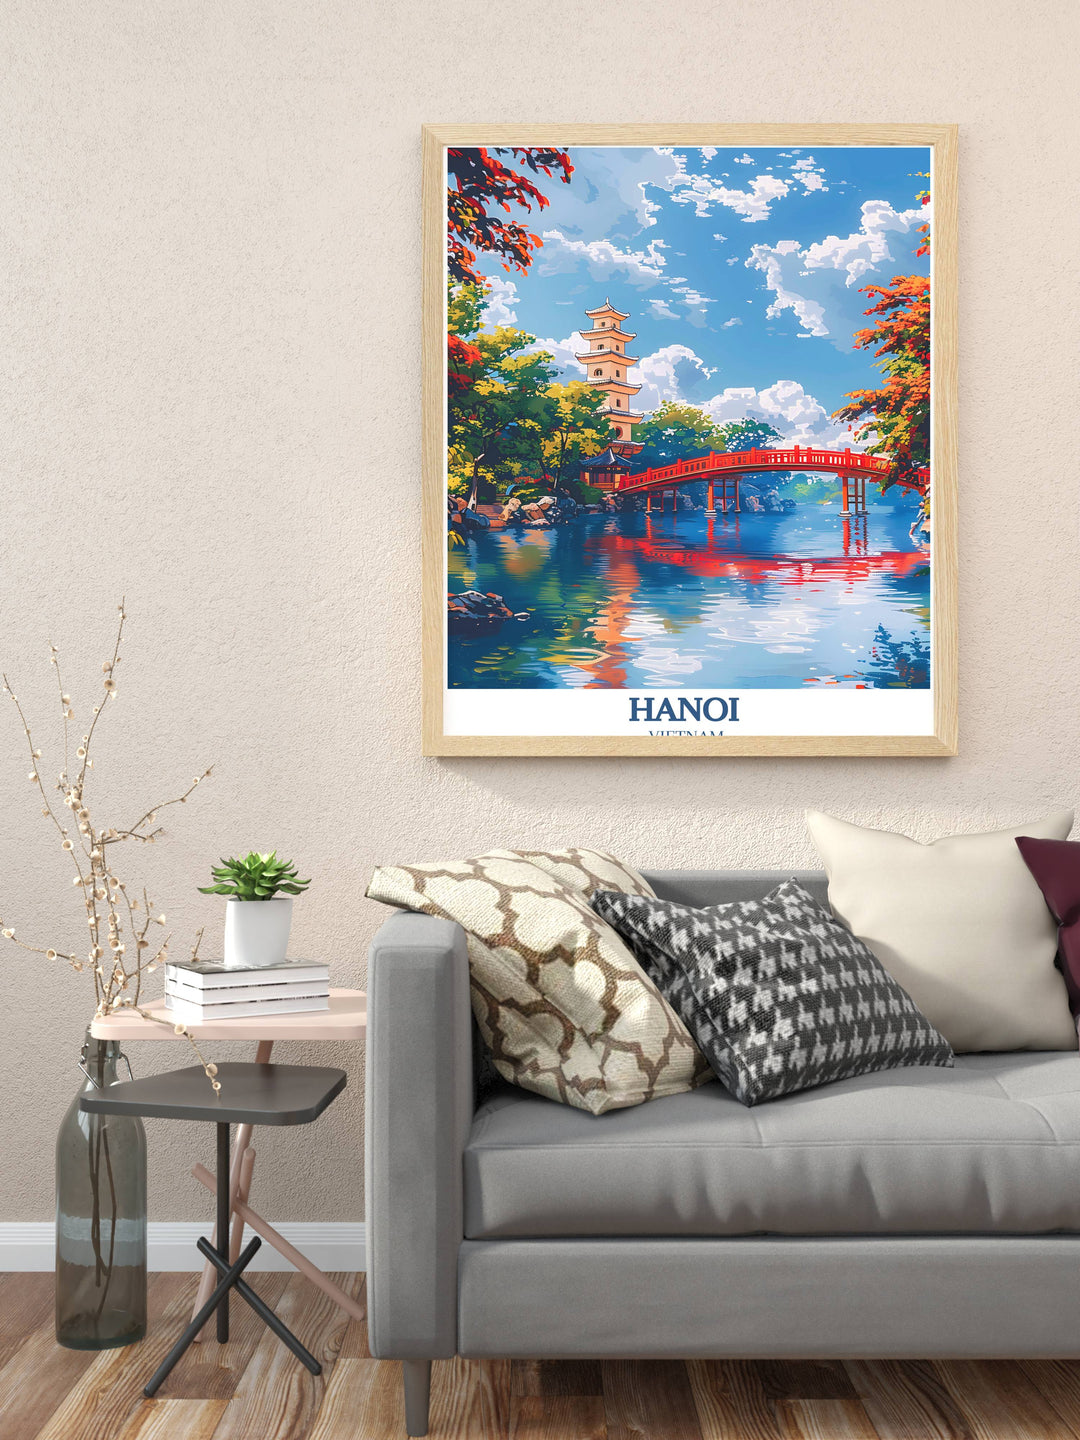 Discover the streets of Hanoi through this stunning Hanoi photo, where Turtle Tower stands proudly, encapsulated in a Vietnam travel print for art lovers.